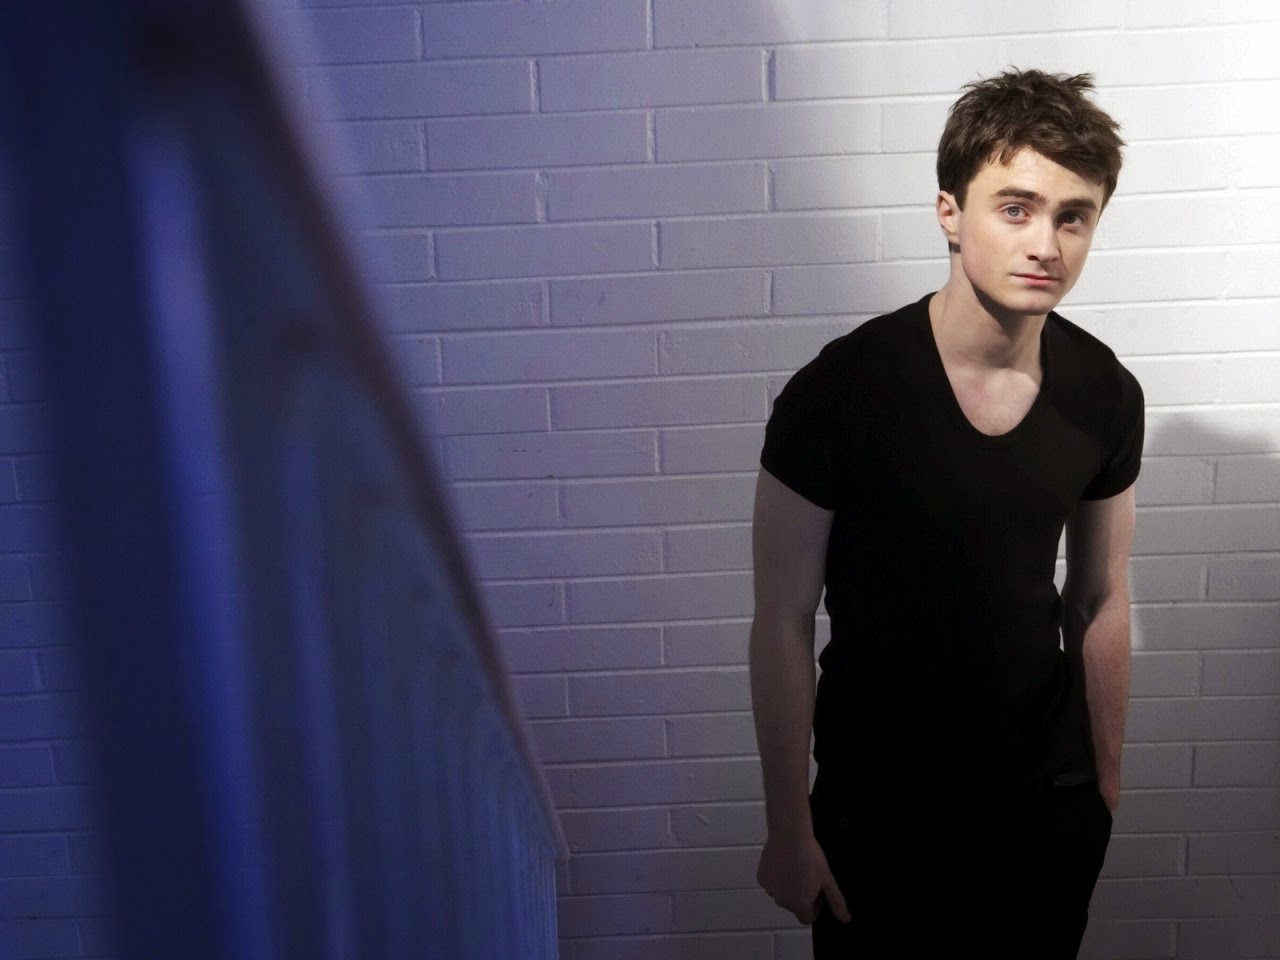 Global Pictures Gallery Daniel Jacob Radcliffe Full HD